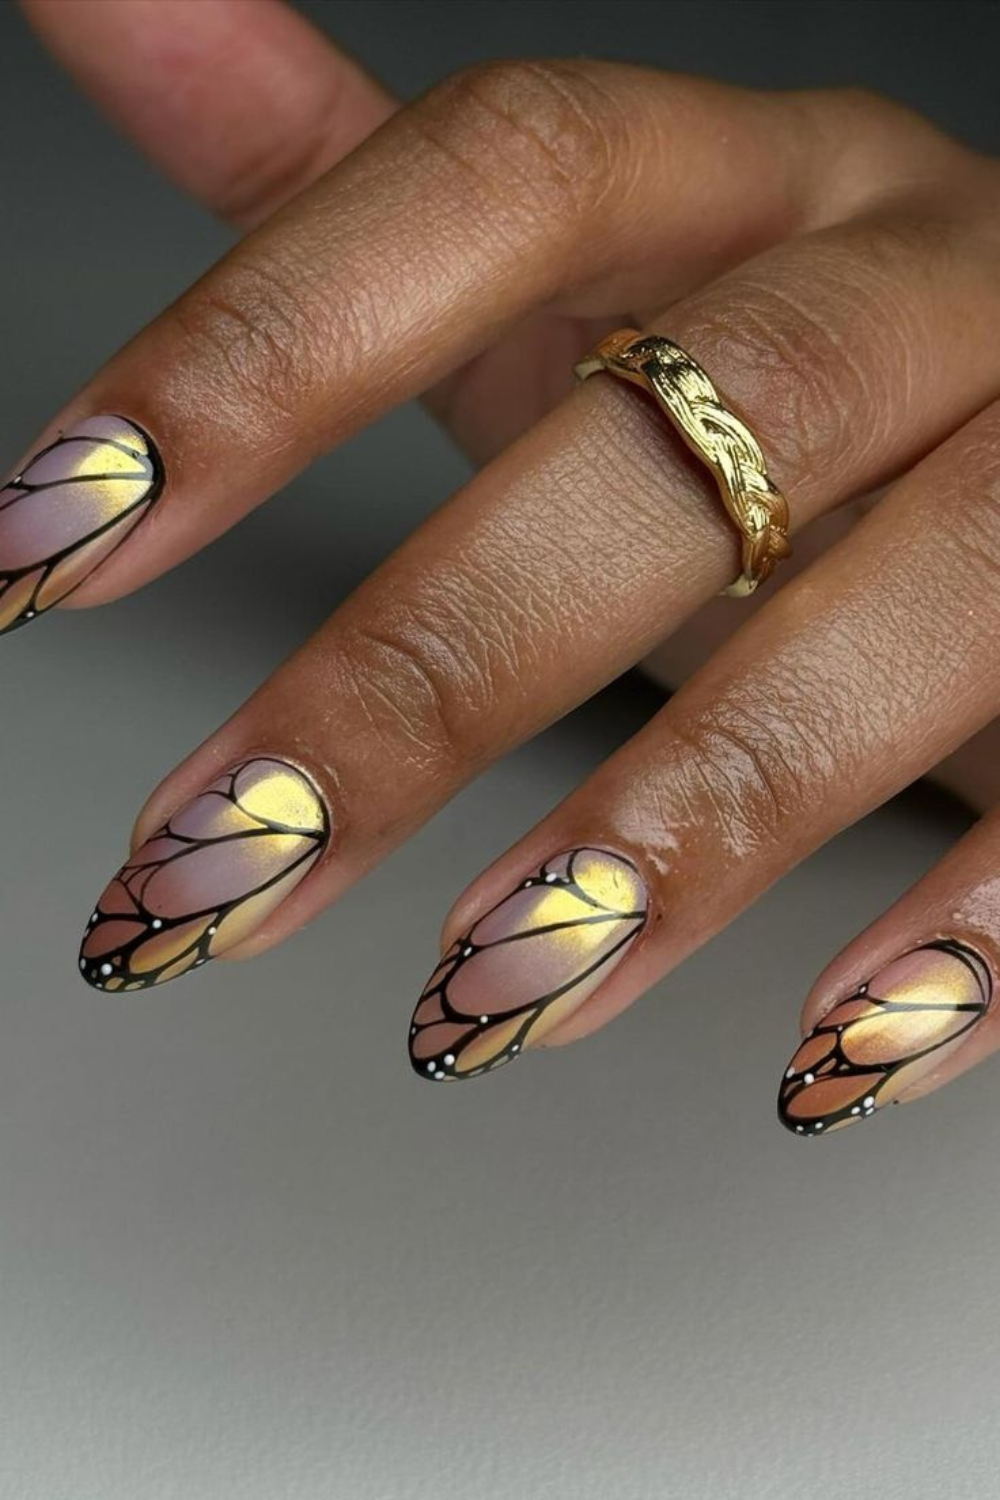 43 Marvelous May Nails To Fall in Love With this Season!